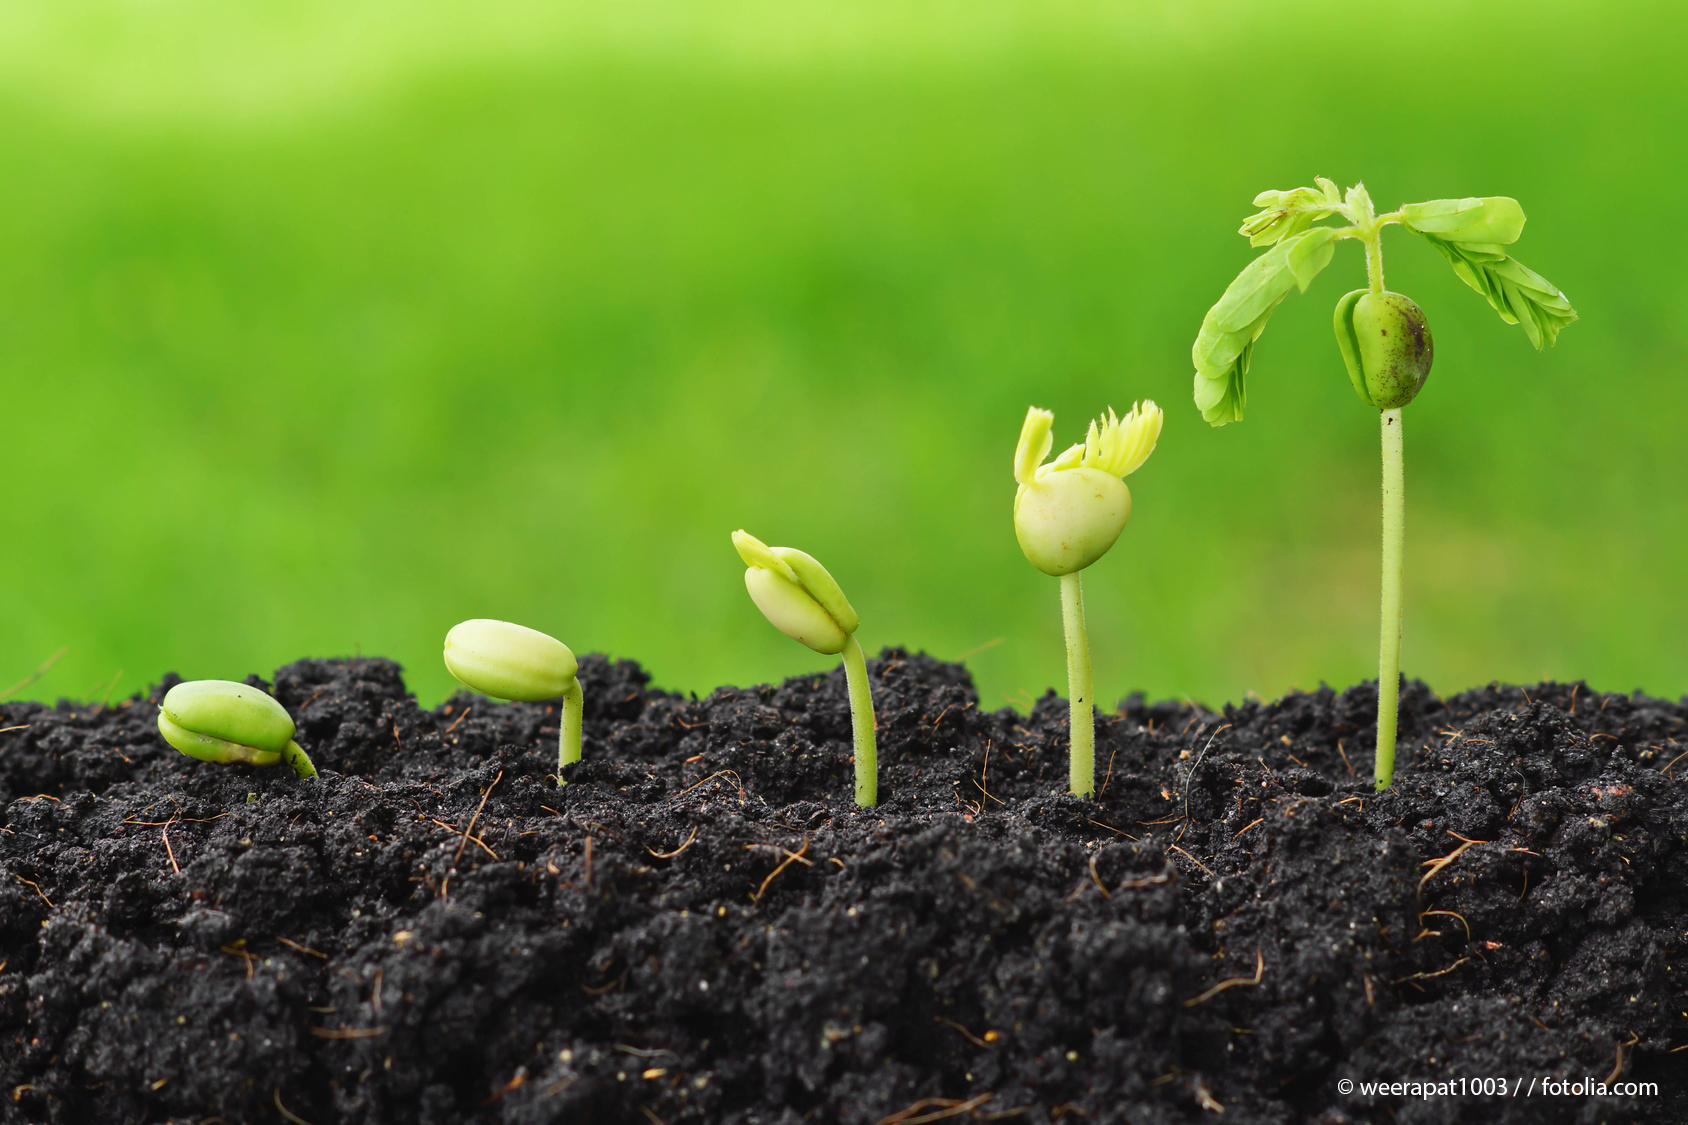 plant germination sequence © weerapat1003 / fotolia.com